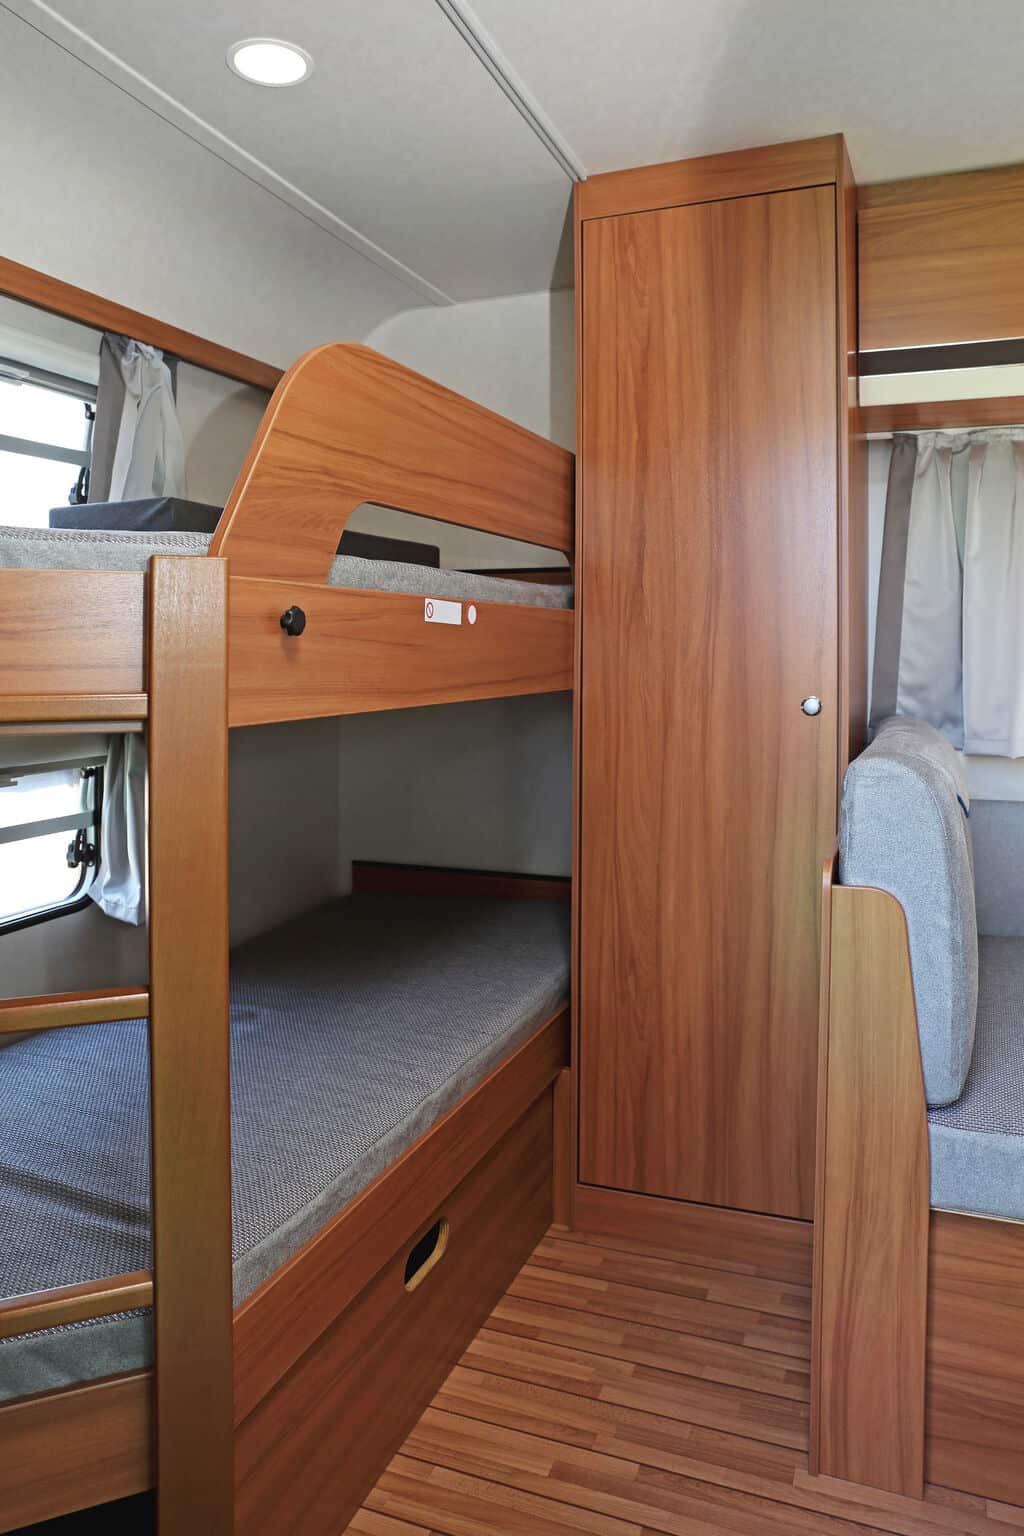 5 Travel Trailers With Quad Bunkhouse, Rv Sleeps 8 Bunk Beds